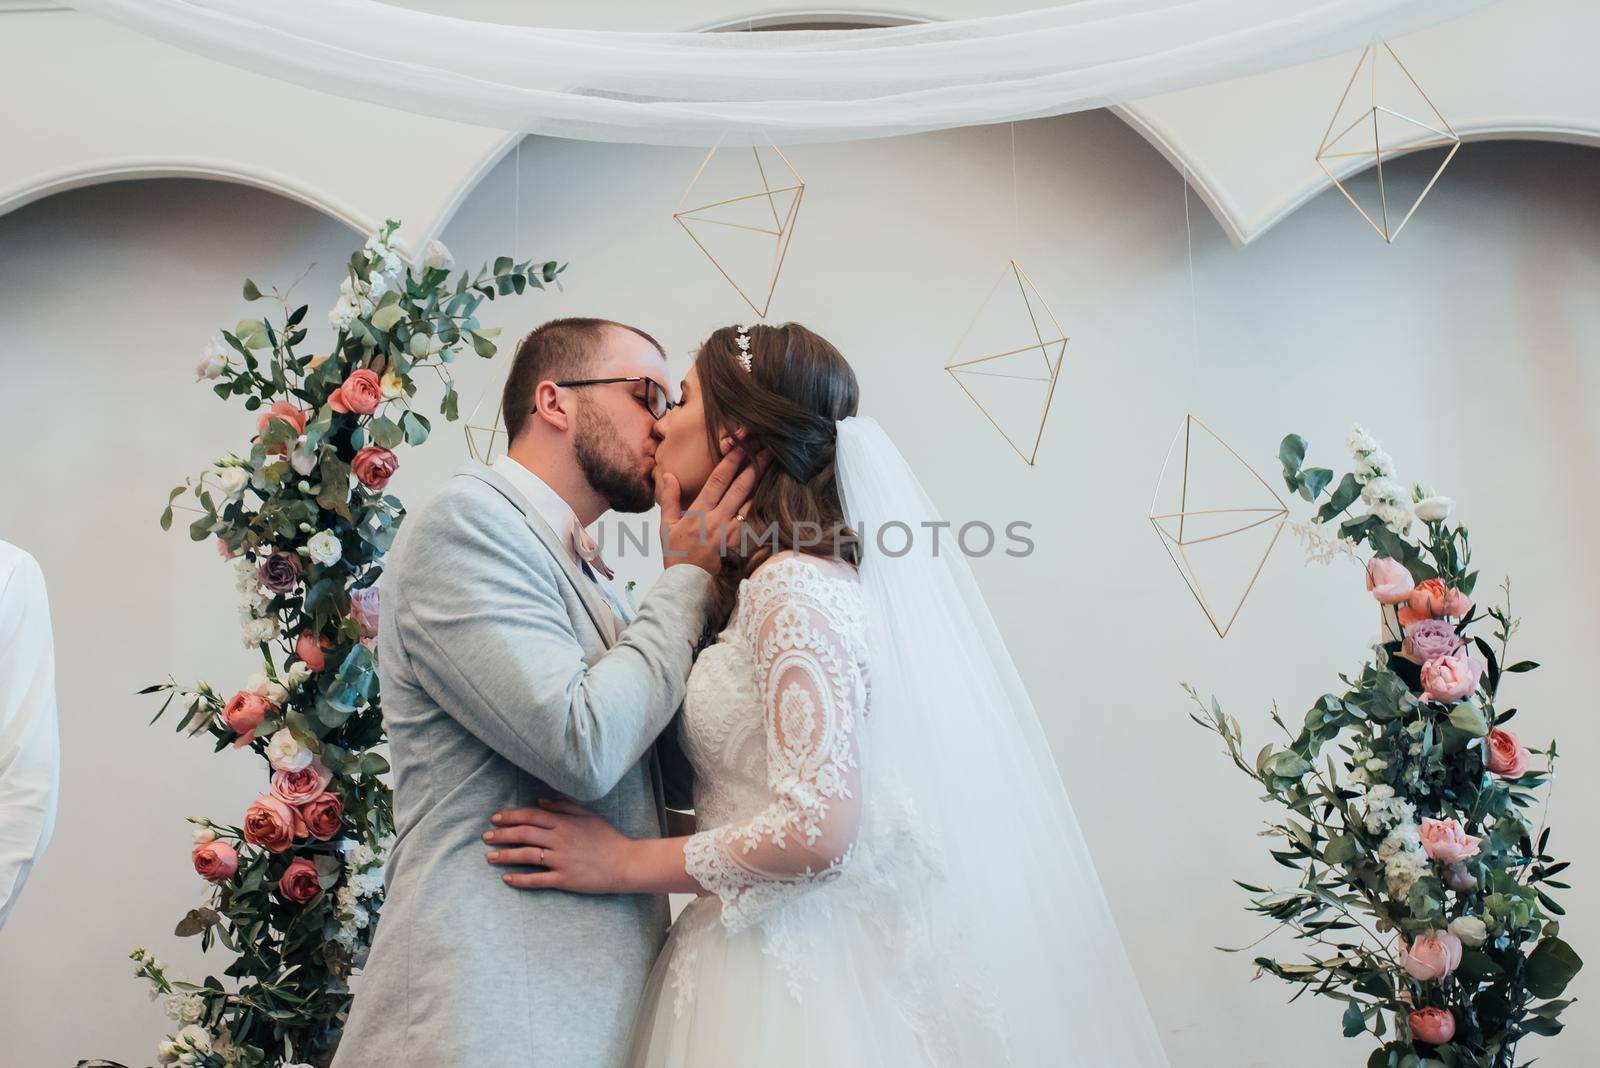 Wedding photography kiss bride and groom in different locations.